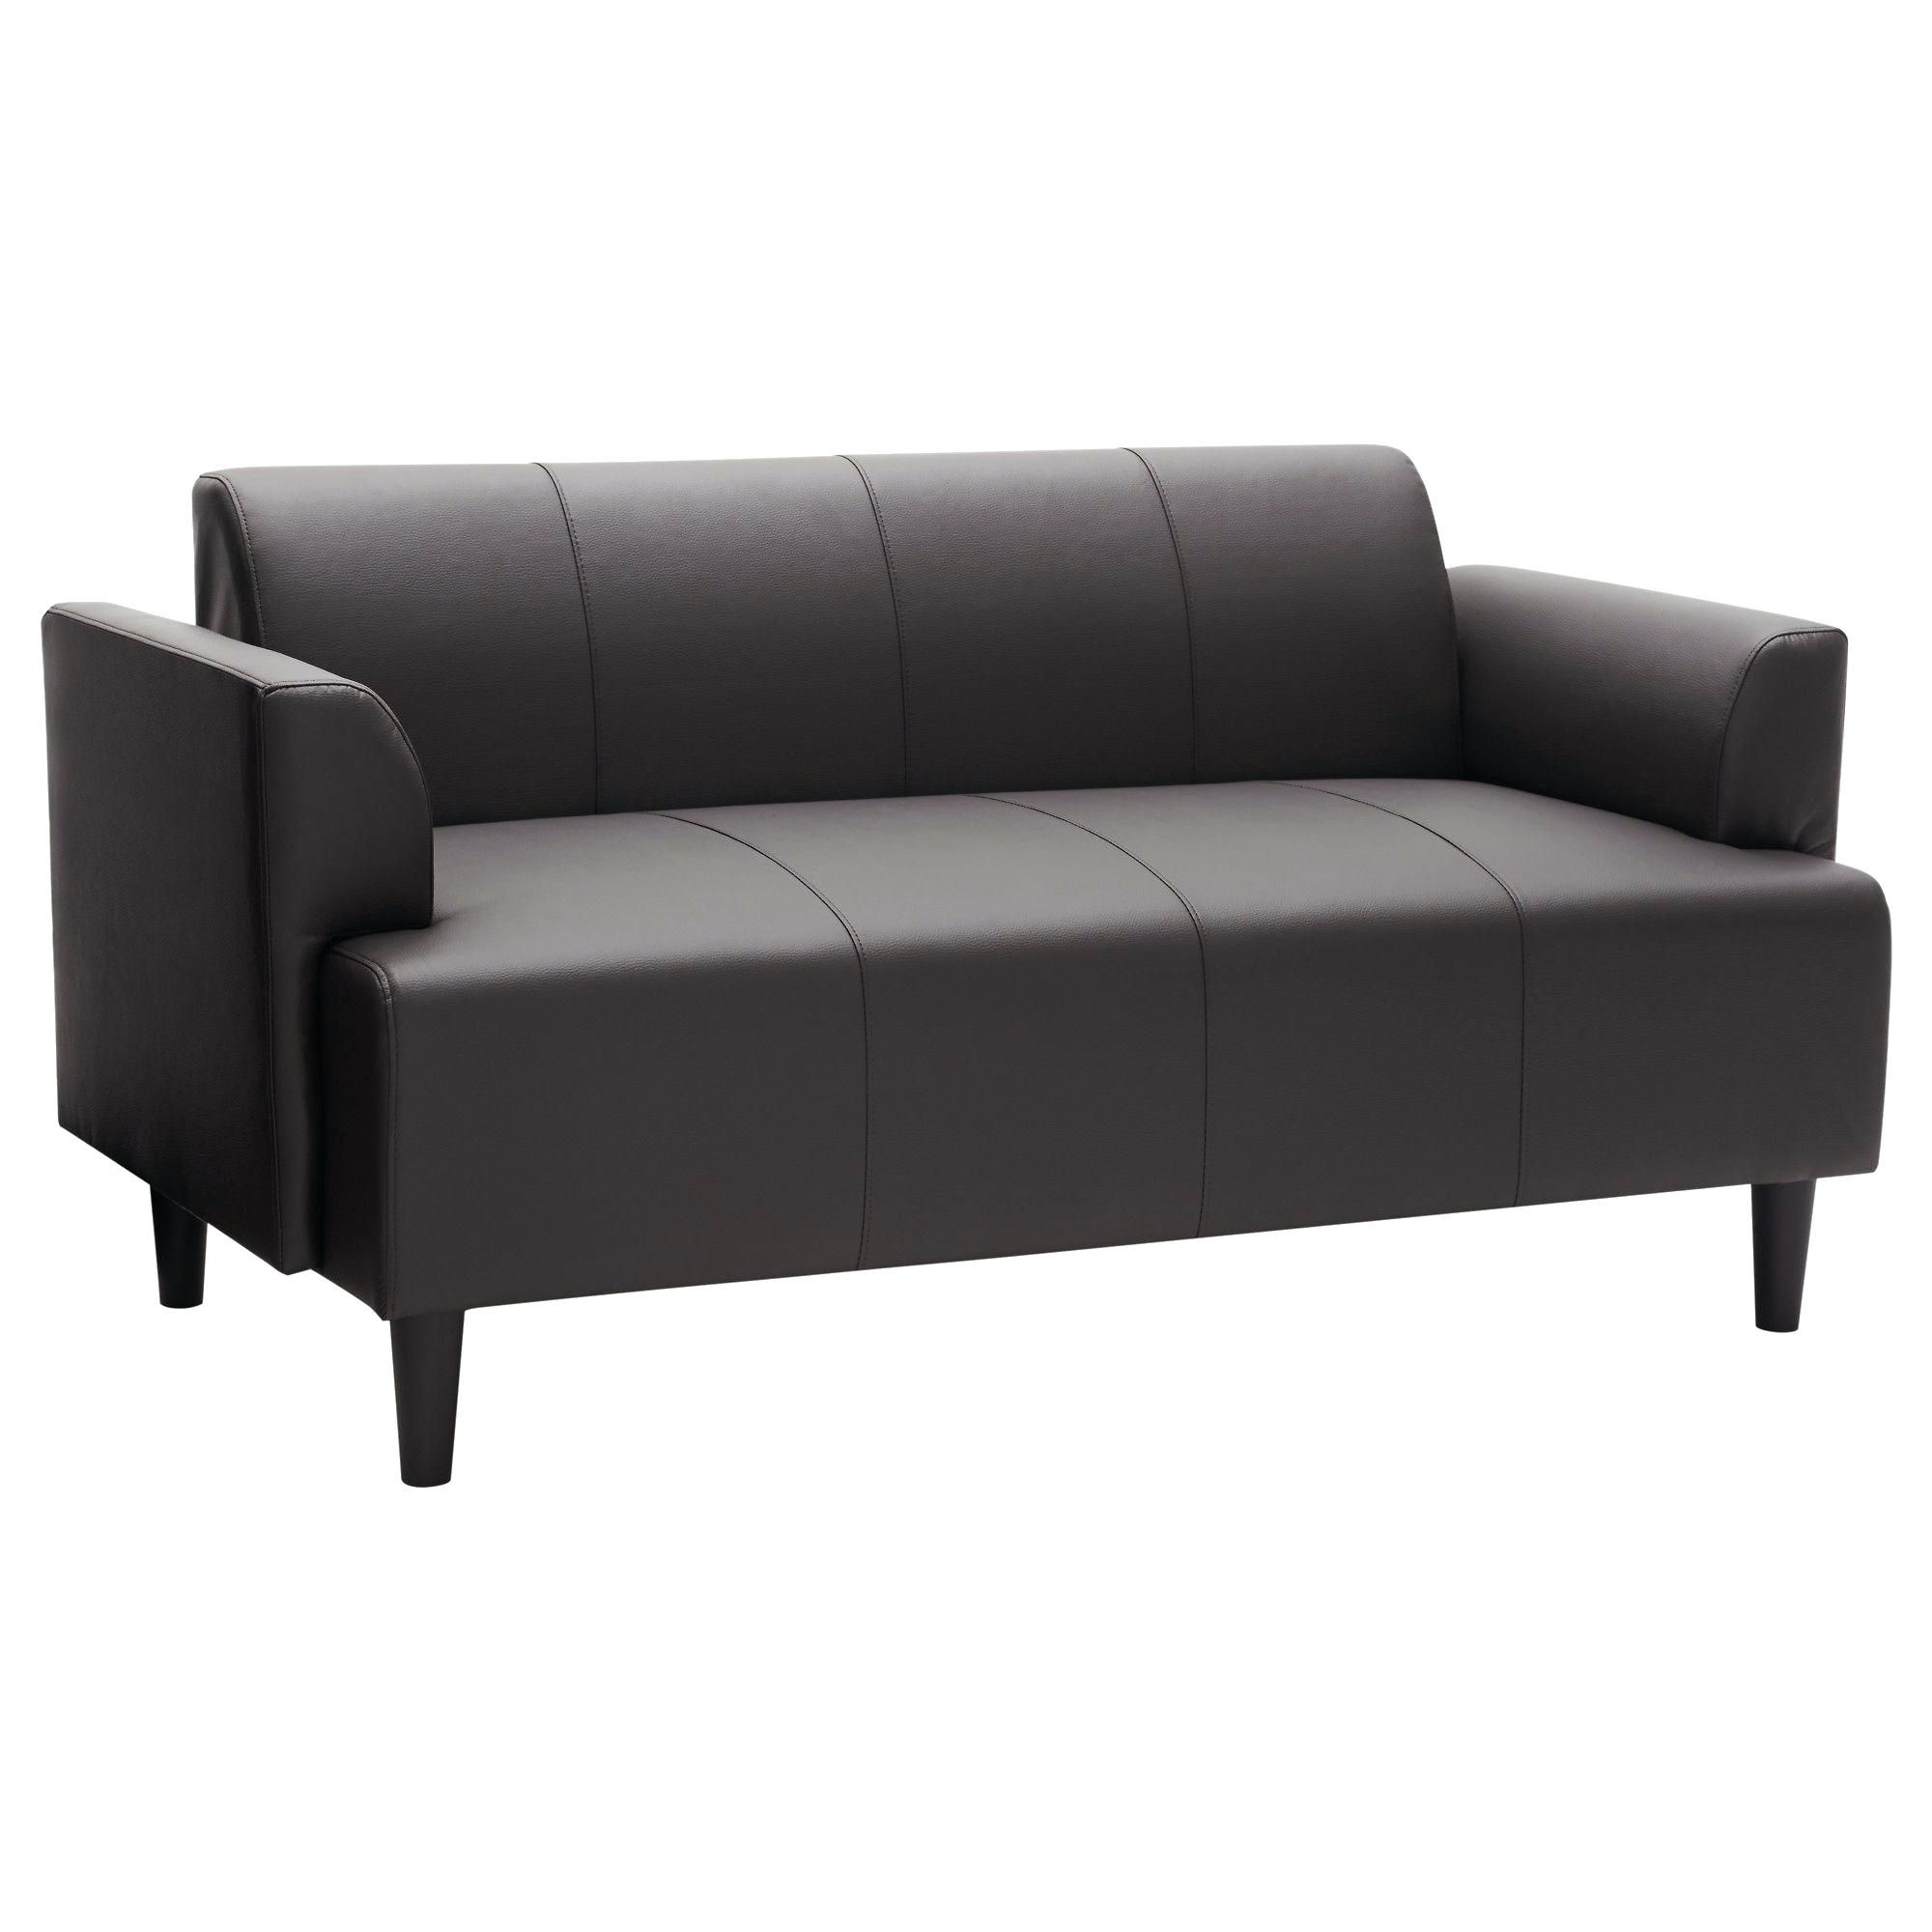 Sectional Sofas At Bc Canada Pertaining To Popular Leather Couches On Sale Sectional Furniture Canada Couch Set Nj (View 15 of 20)